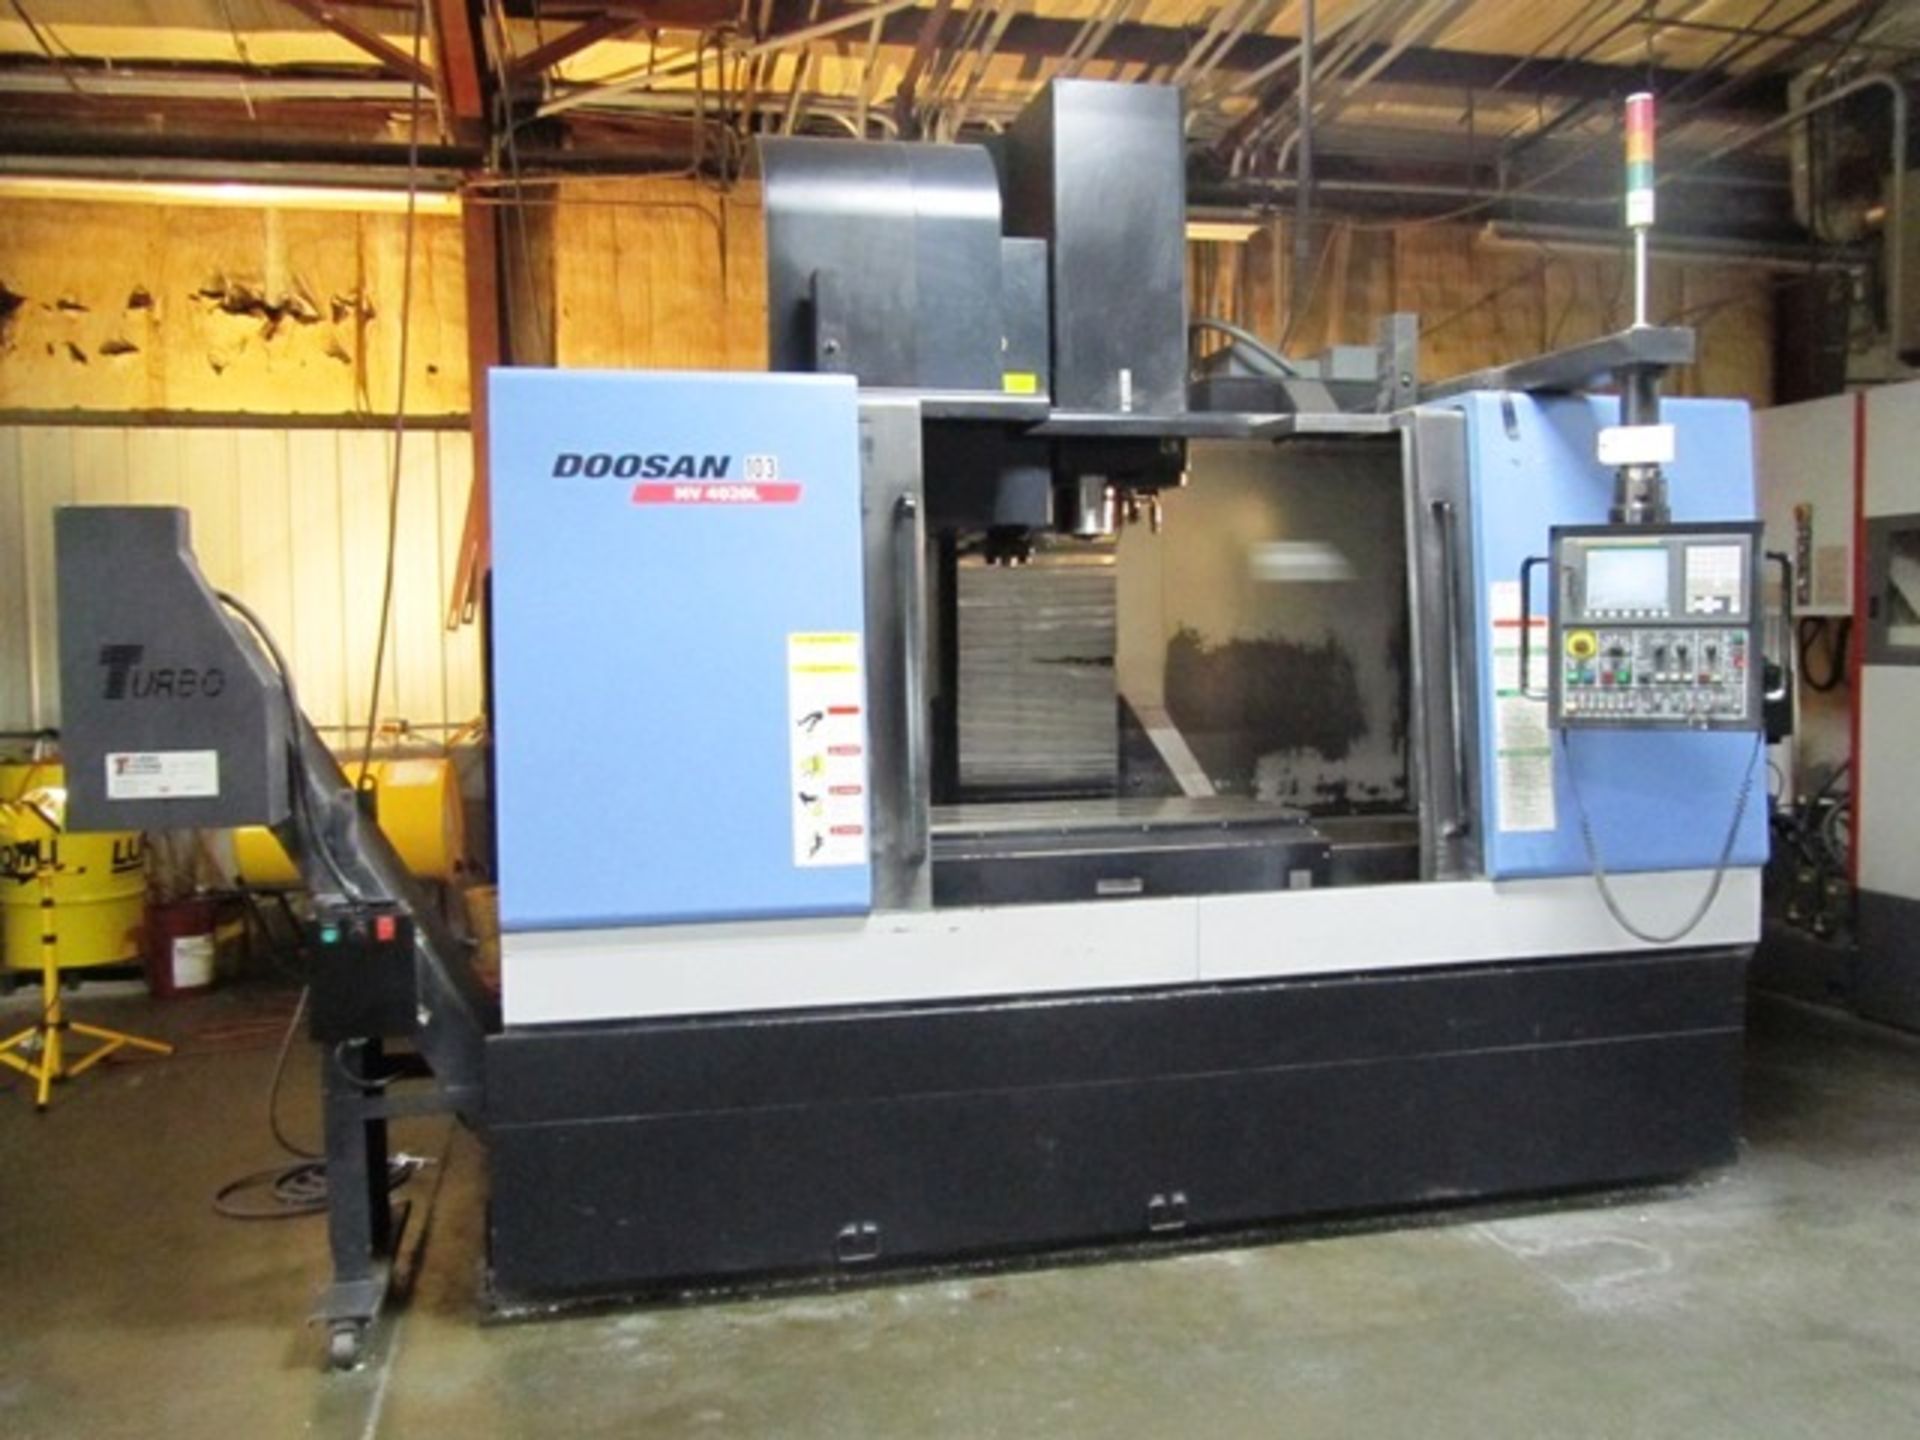 Doosan MV 4020L CNC Vertical Machining Center with 48'' x 20'' Worktable, #40 Taper Spindle Speeds - Image 3 of 5